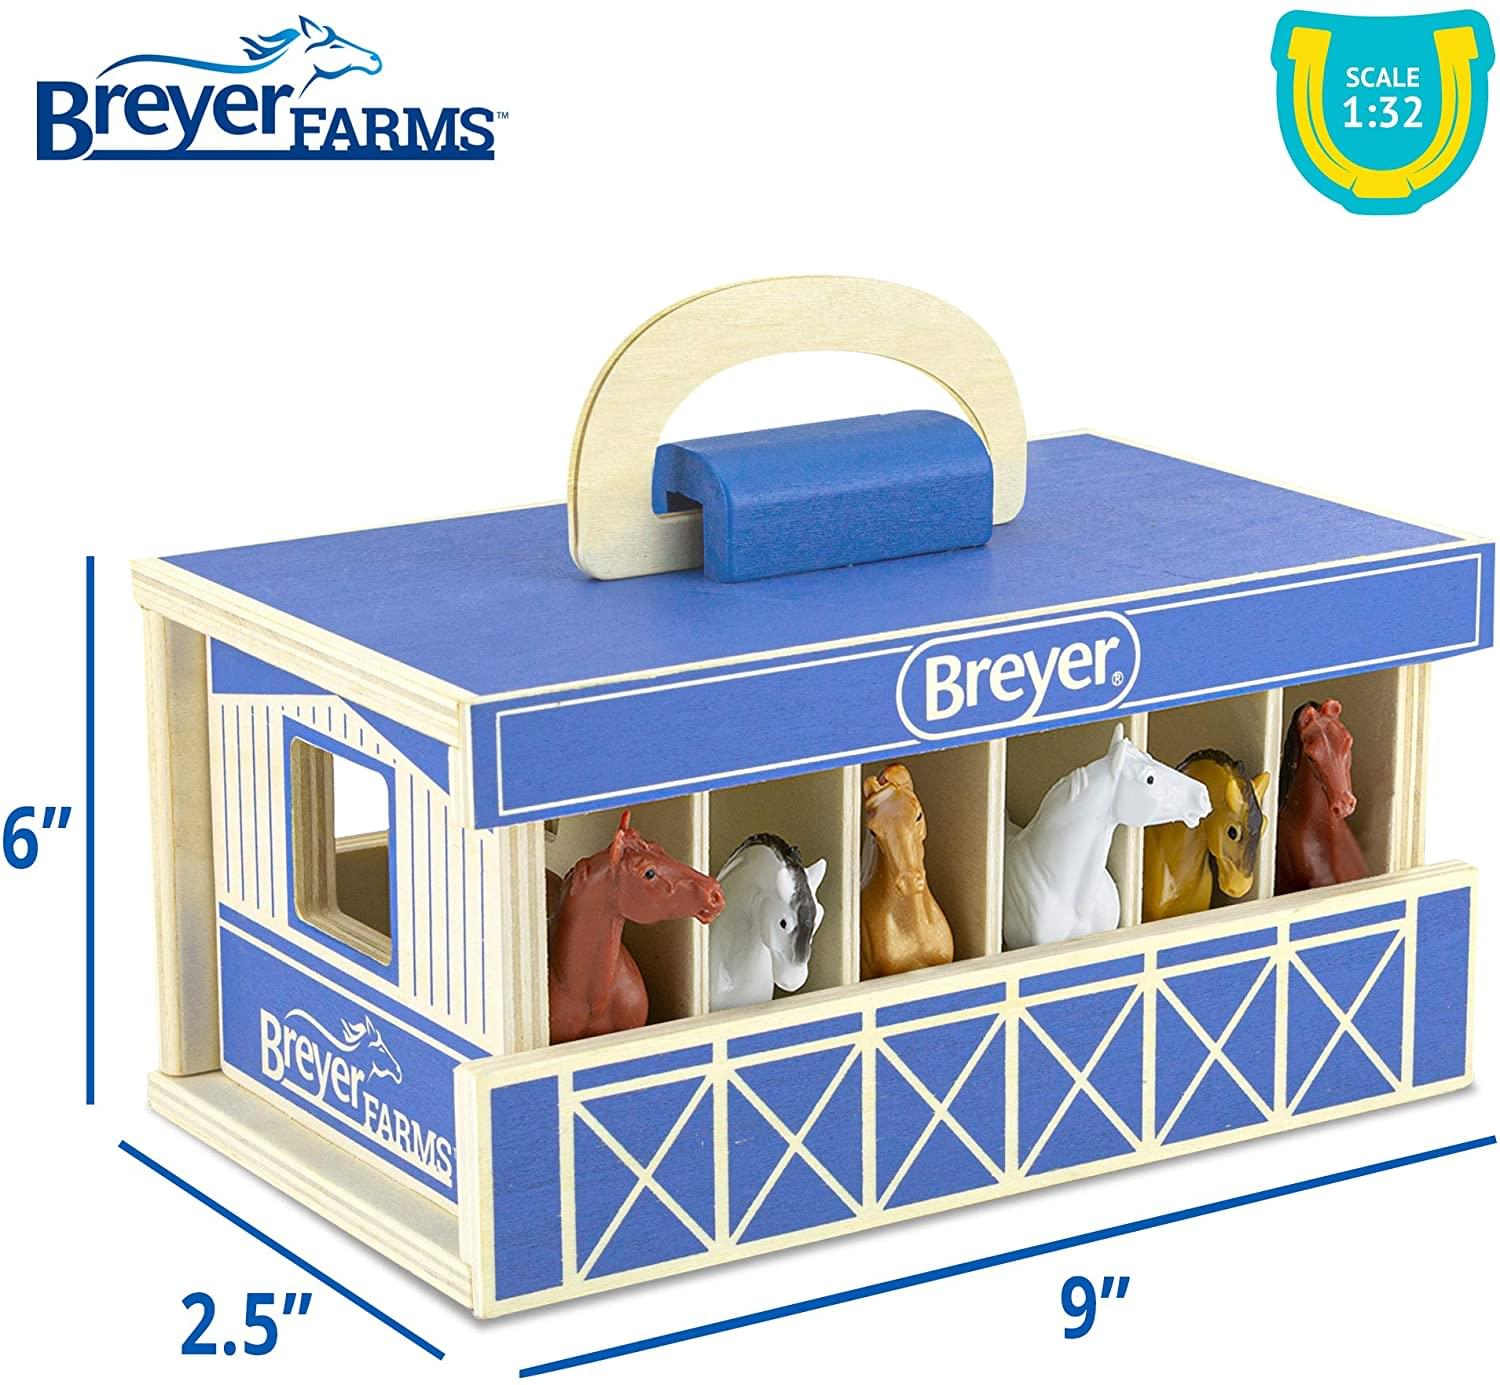 Breyer Farms Wooden Carry Stable Playset w/ 6 Horses